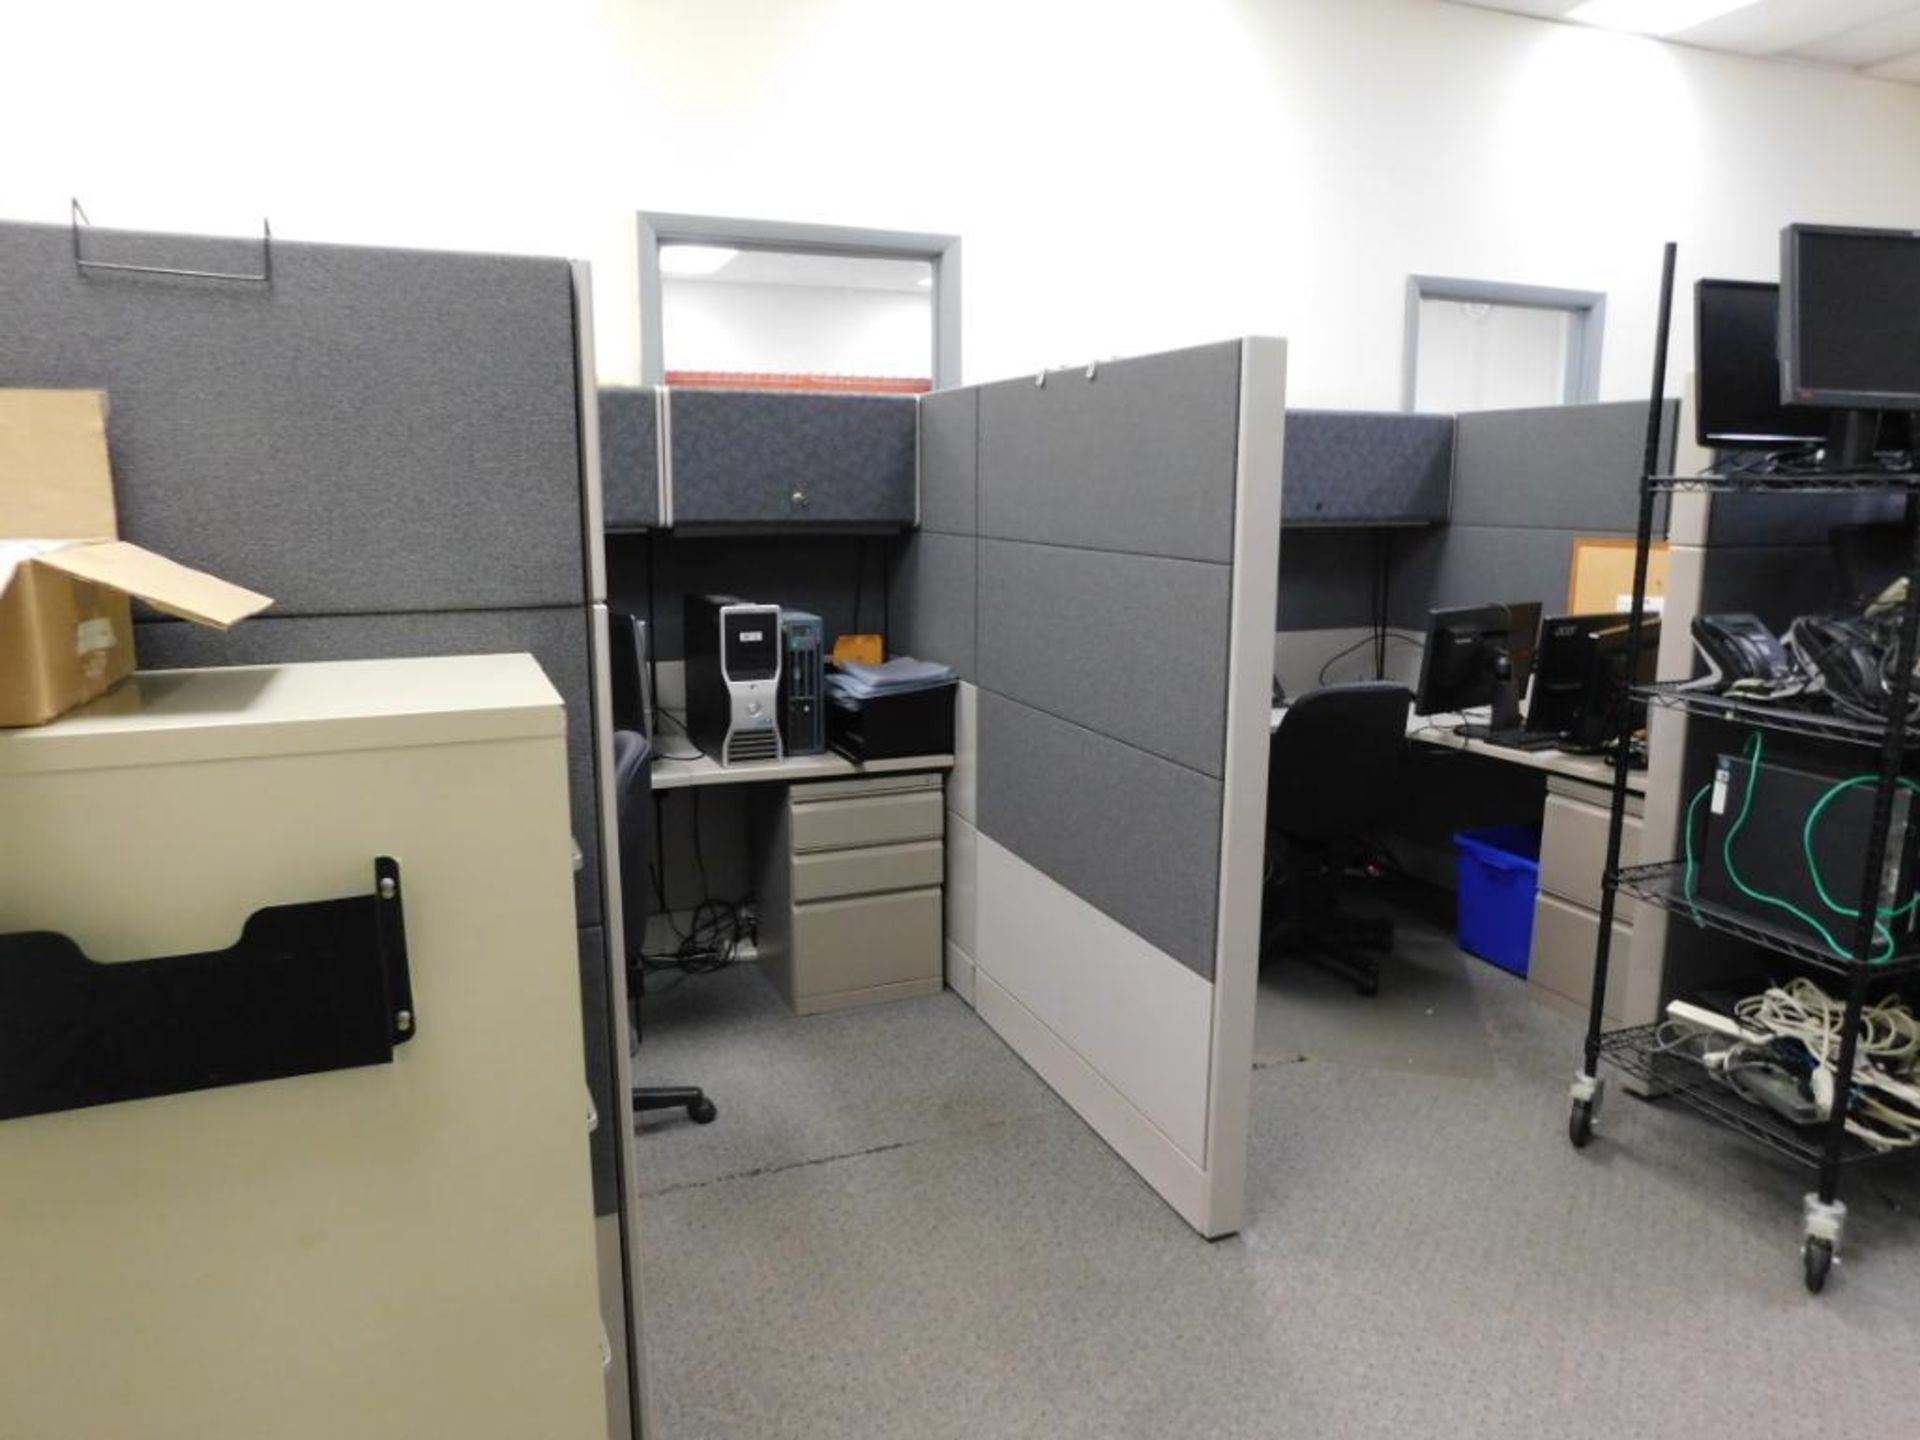 LOT: Contents of Office including (4) Cubicle Work Stations, Light Table, (3) Chairs, (3) Metro Rack